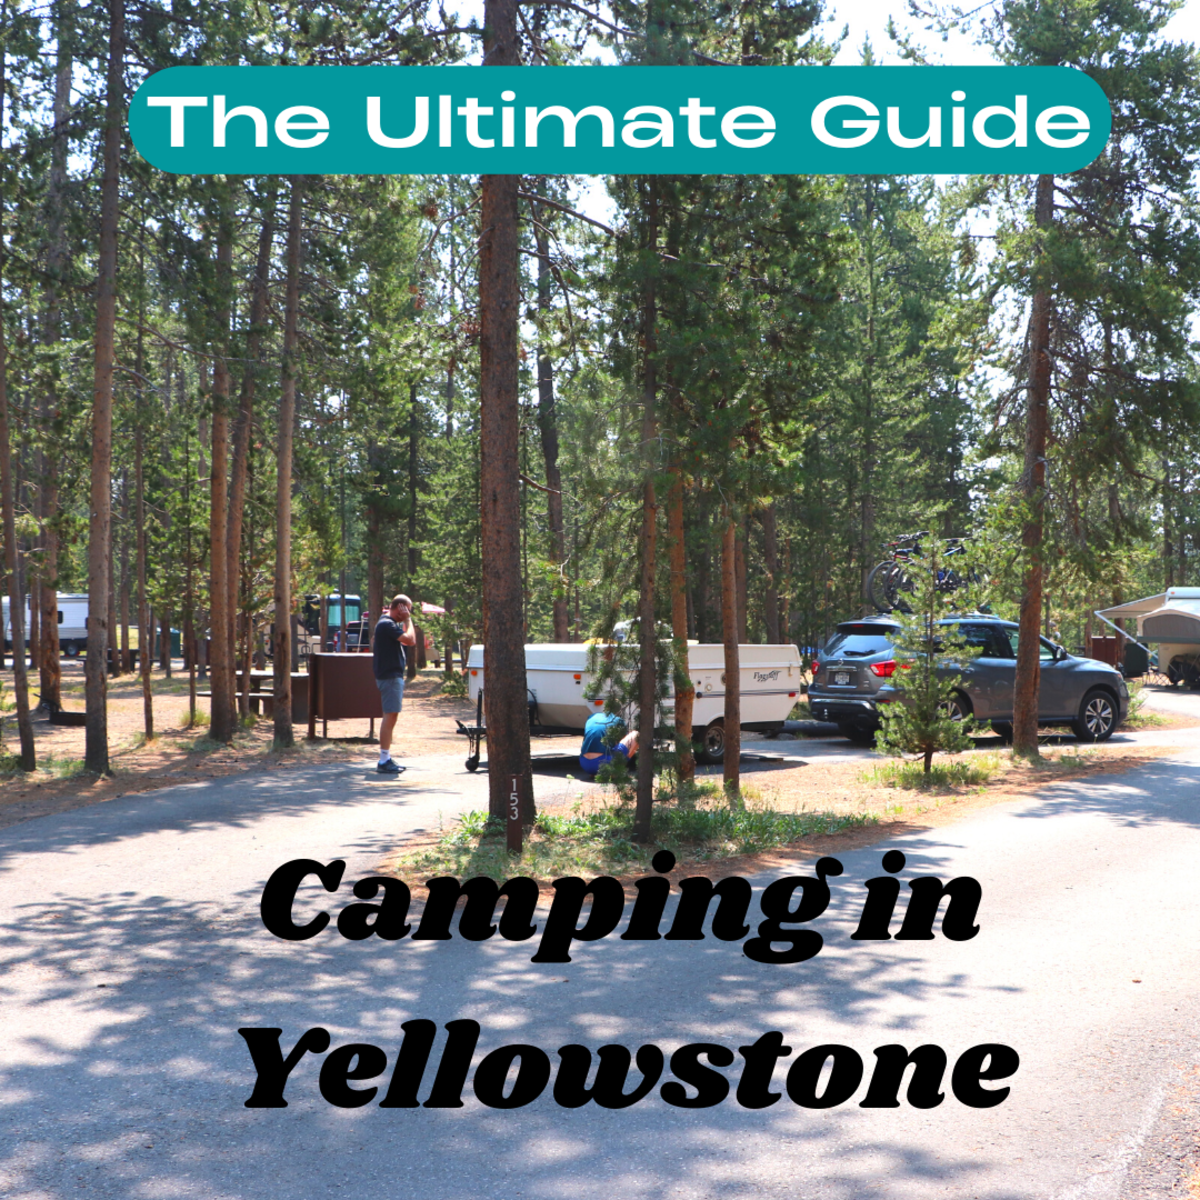 All you need to know about camping inside Yellowstone National Park - whether camping in a tent or a large RV!